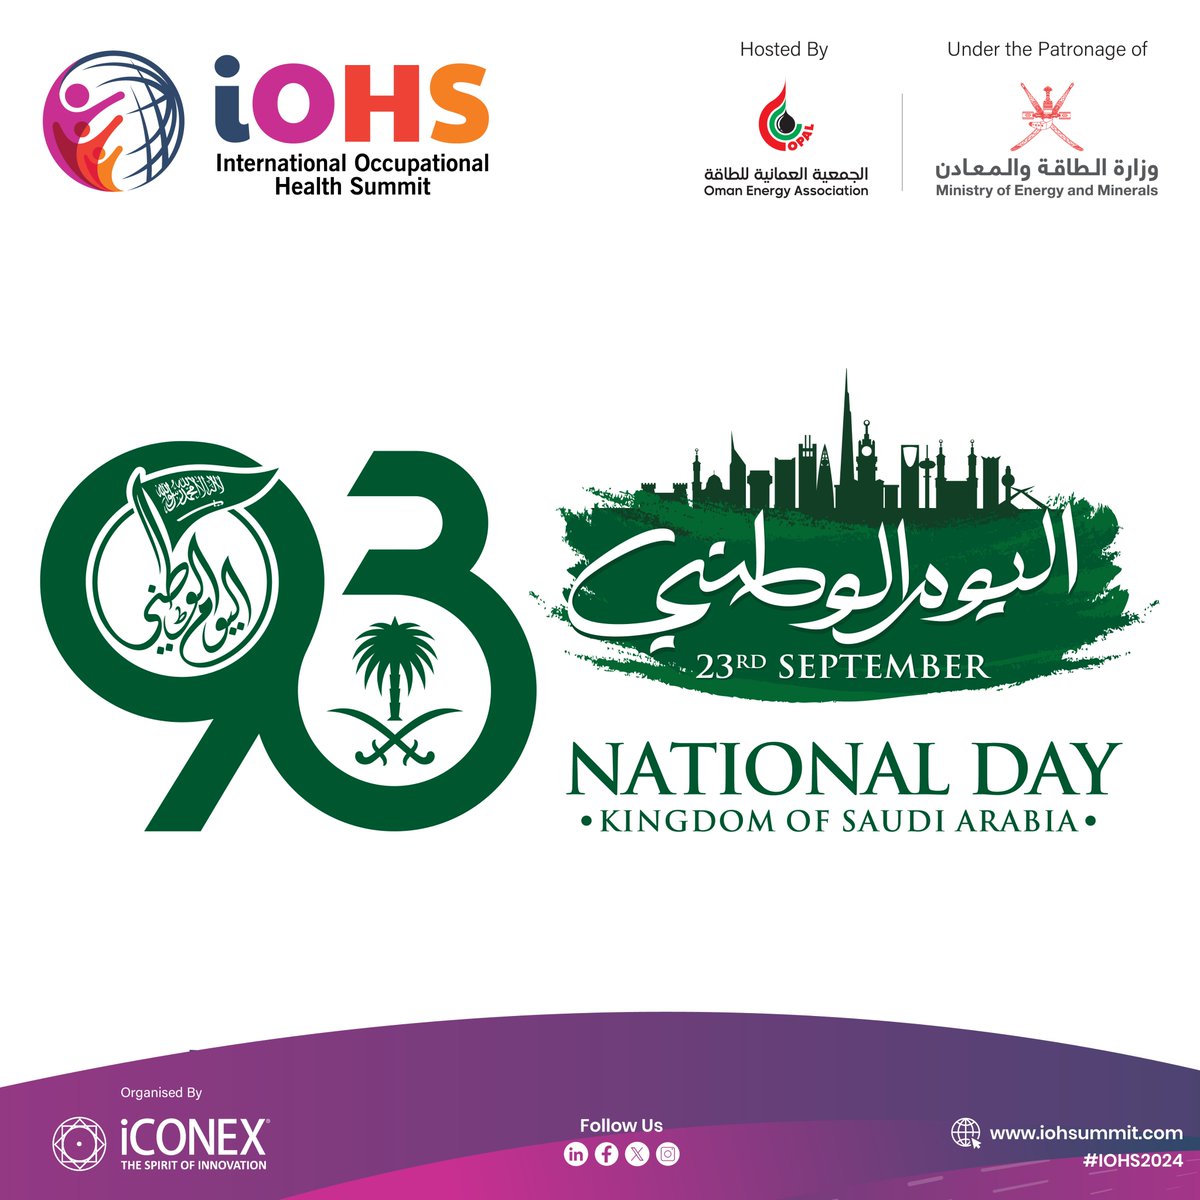 To the Kingdom of Saudi Arabia on its 93rd National Day, may the spirit of unity and progress continue to shine bright. Happy National Day!

#SaudiNationalDay #NationalDay #SaudiArabia #KingdomofSaudiArabia #IOHS2024